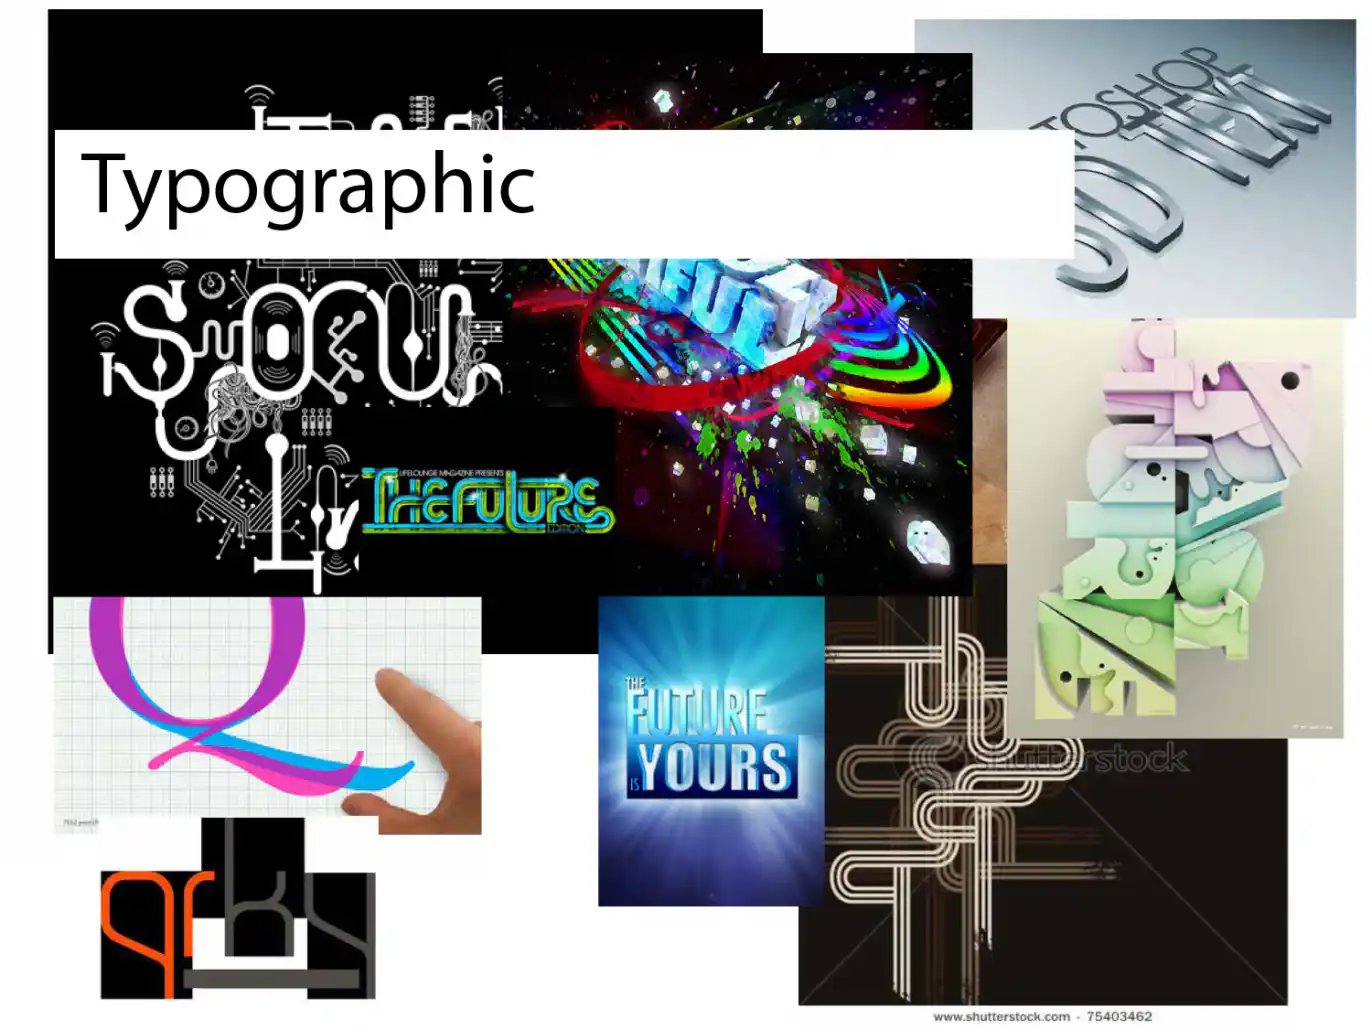 image showing typographic images